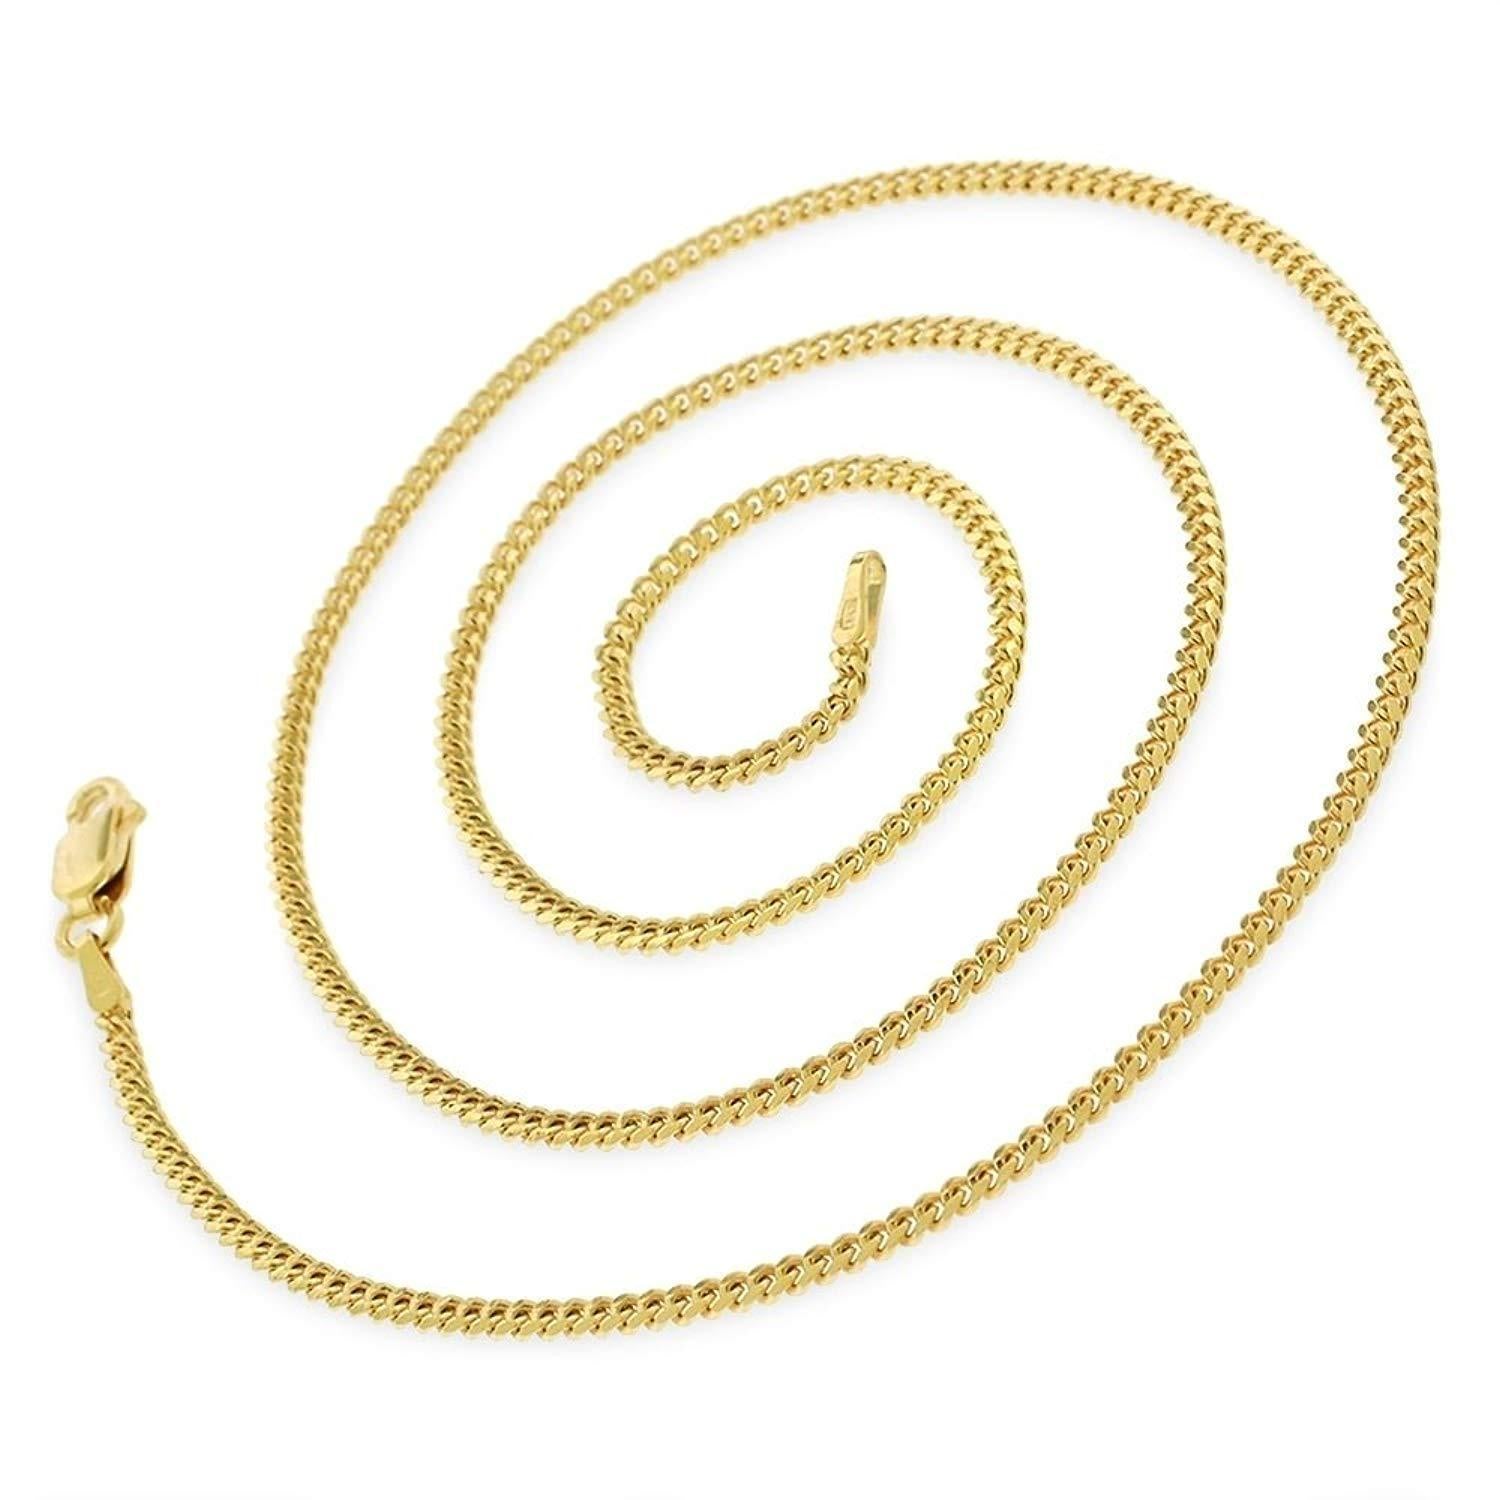 Real Fine Gold Jewelry-14K Yellow Gold 1.5MM Solid Miami Cuban Curb Link Necklace Chains